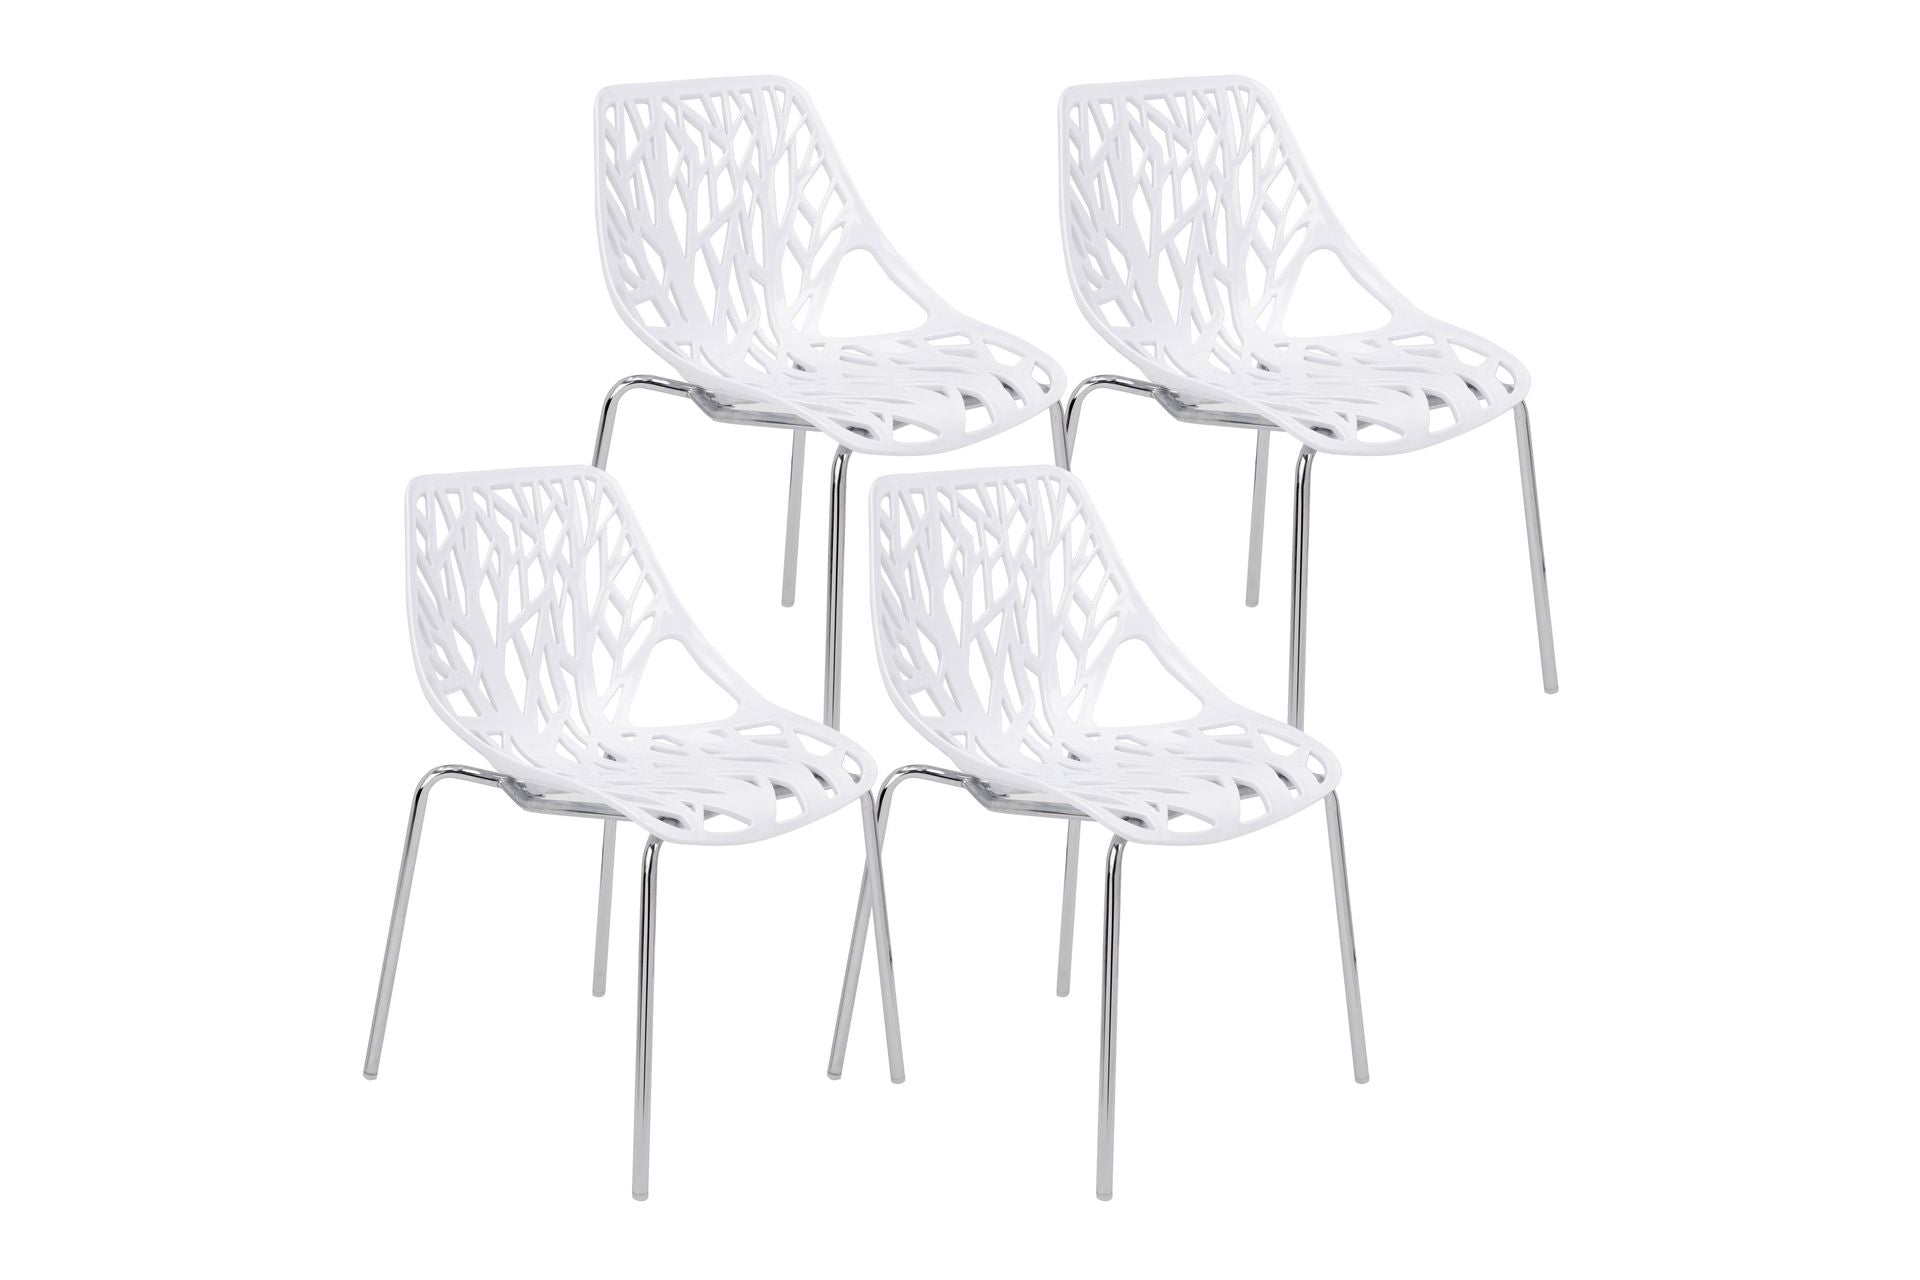 ZNTS White Plastic Chair With Metal Legs, 4 pc / Set B060103882